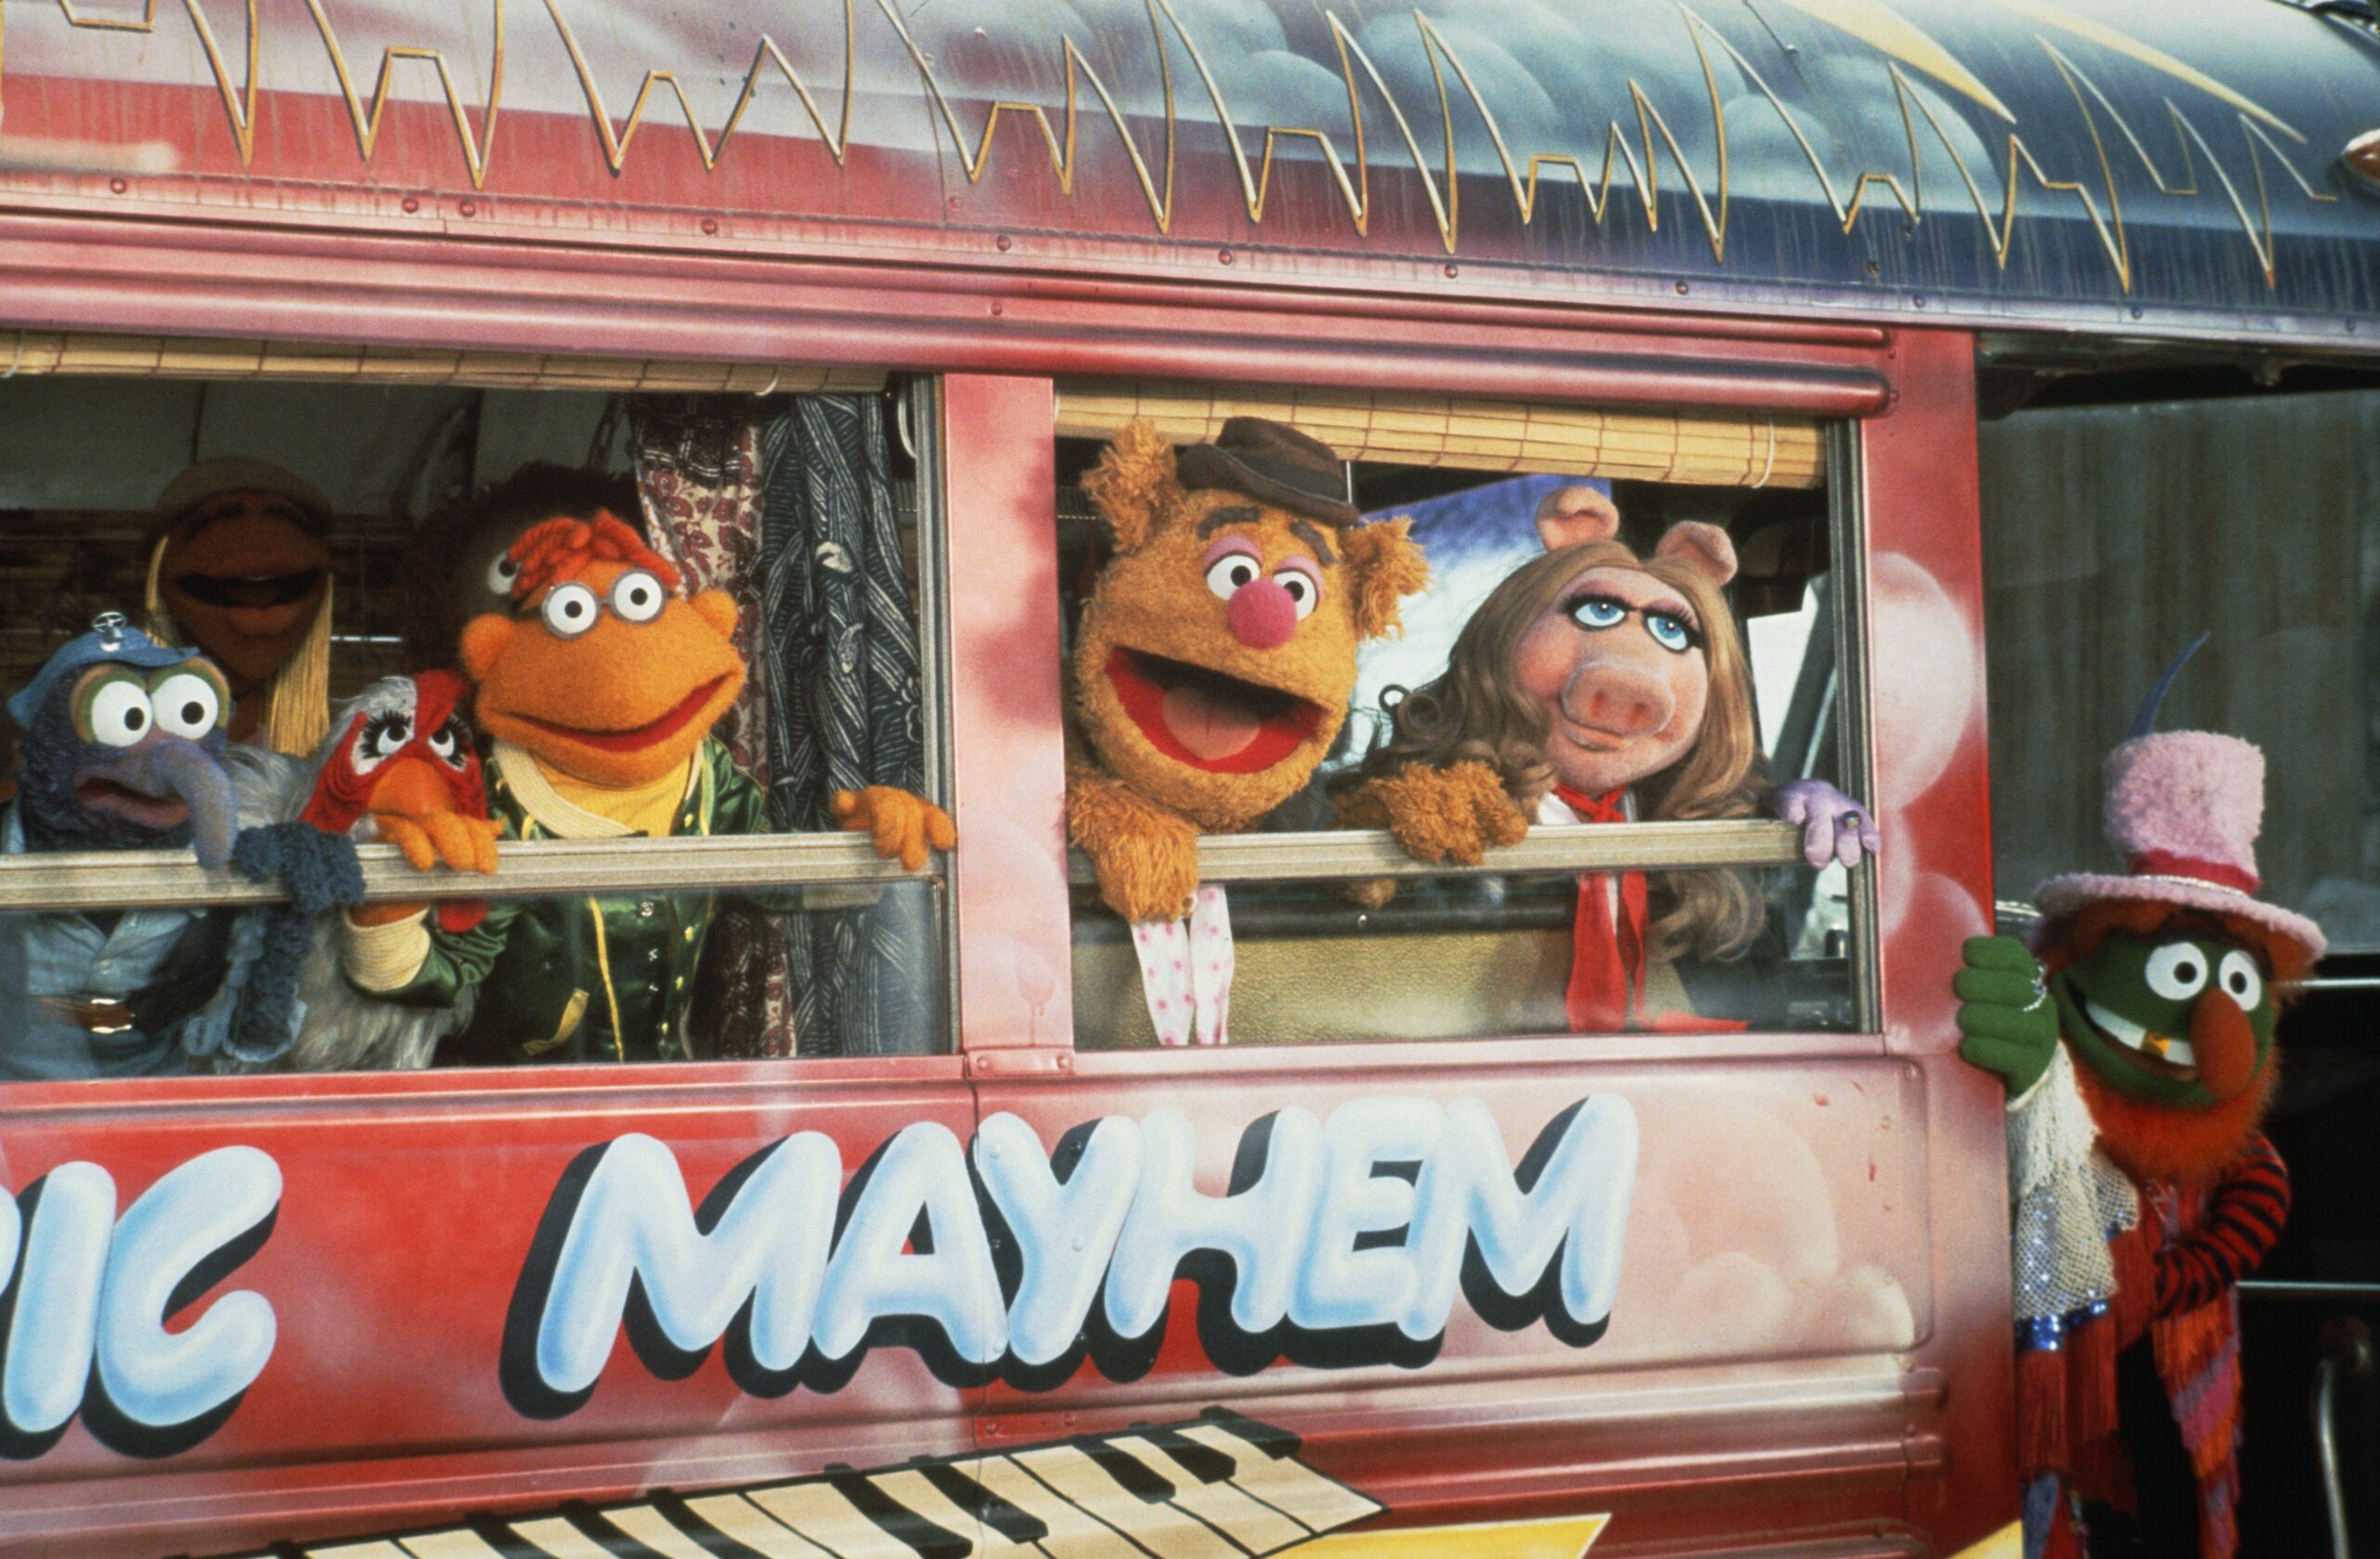 Fathom Events & Universal Pictures Celebrate 45 Years of “The Muppet Movie,” Bringing it Back to Theaters Nationwide on June 2 & 3